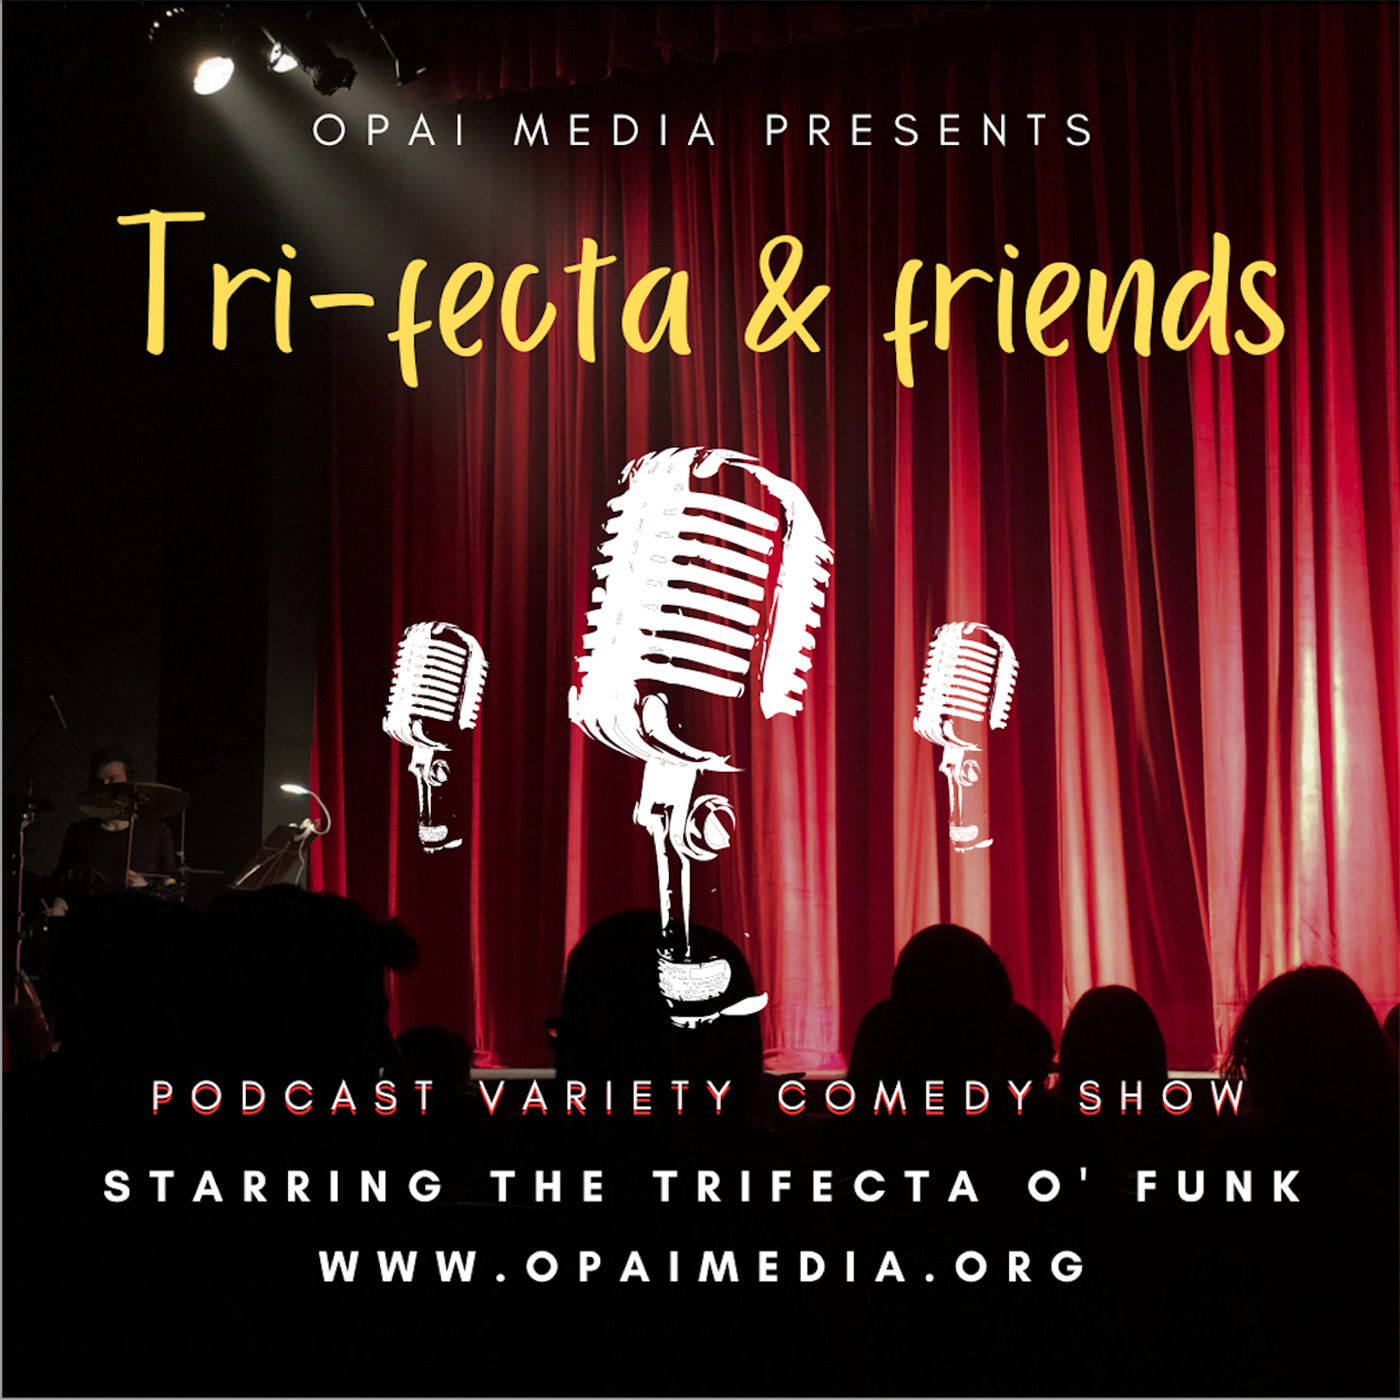 Show artwork for The Trifecta & Friends Variety Comedy Show